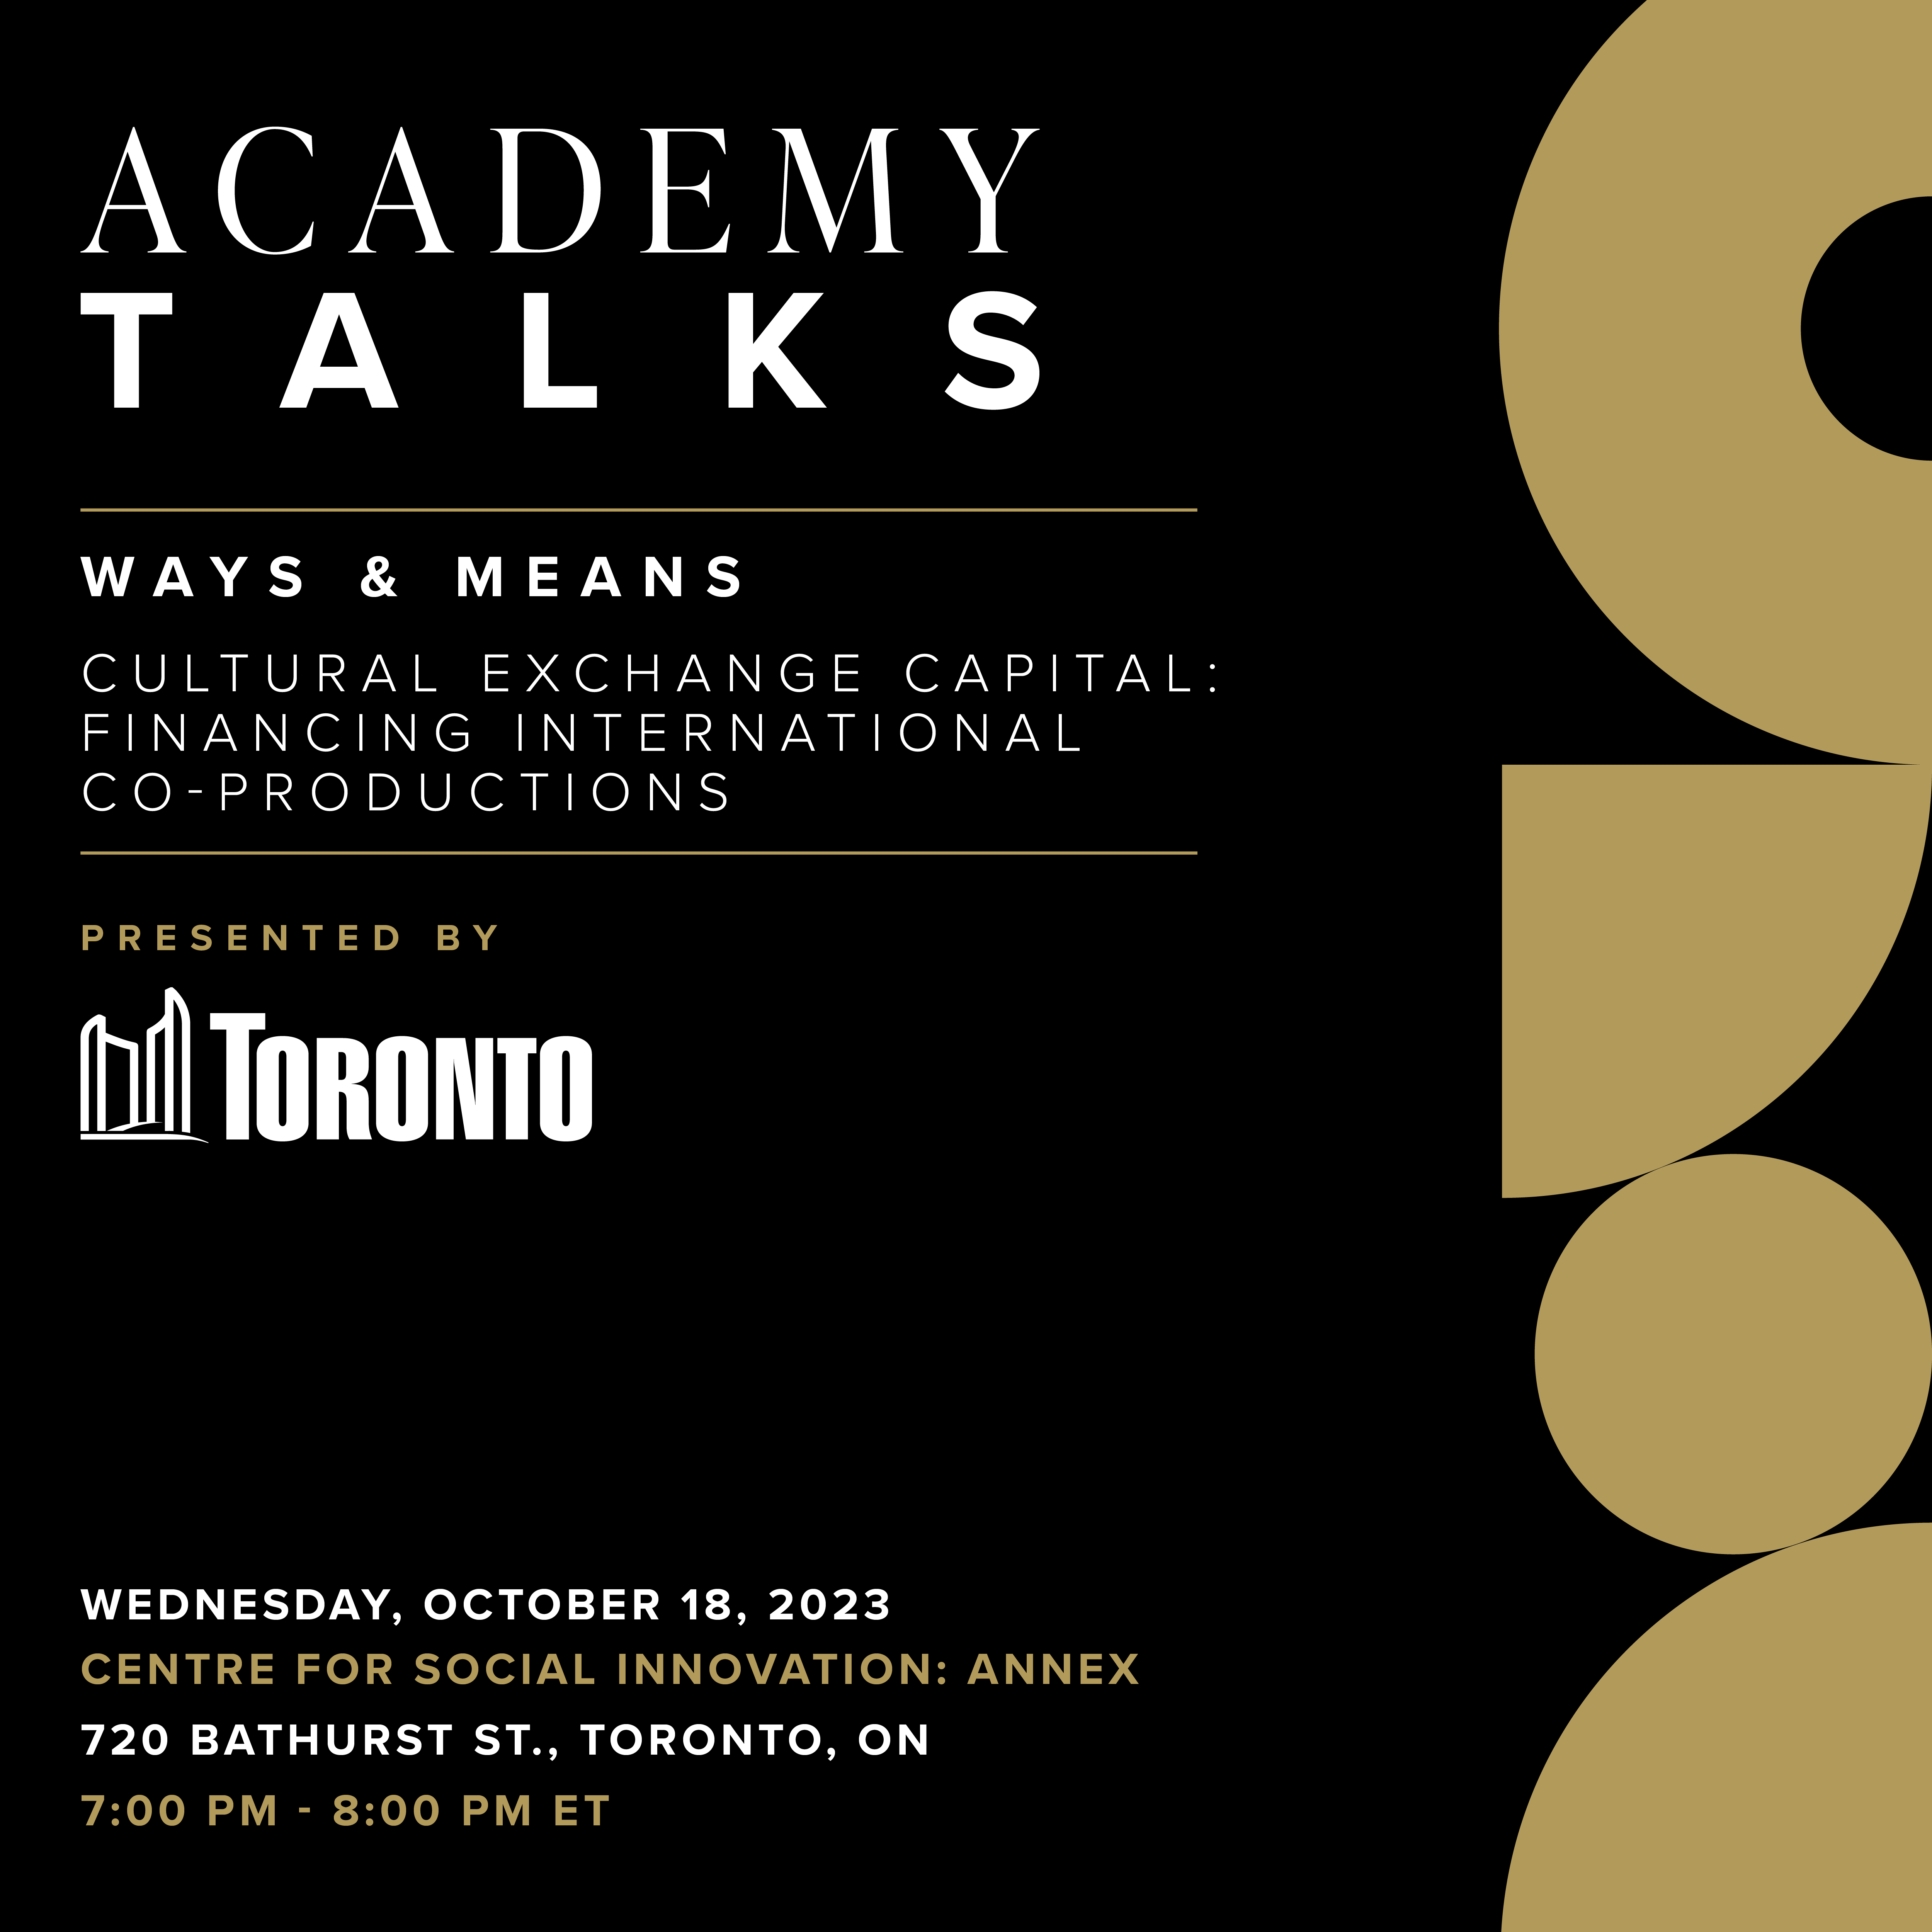 Academy Talks: Ways & Means | Cultural Exchange Capital: Financing International Co-Productions